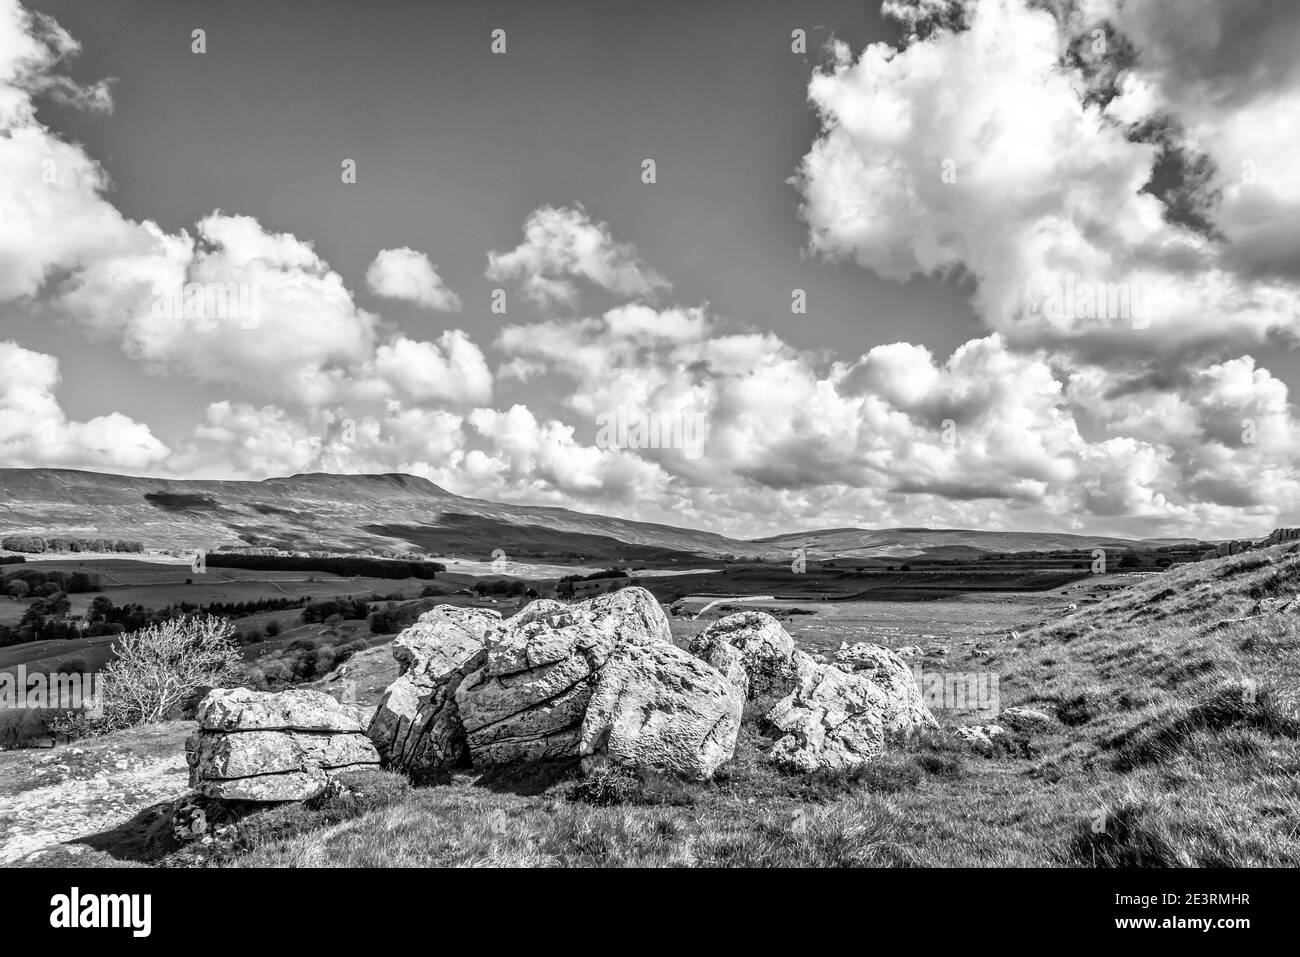 England. Fabulous summer scenery in monochrome of Whernside the highest of the Yorkshire Dales Three Peaks seen here from above Chapel Le Dale along with limestone boulders, relics of the ice-age. Stock Photo